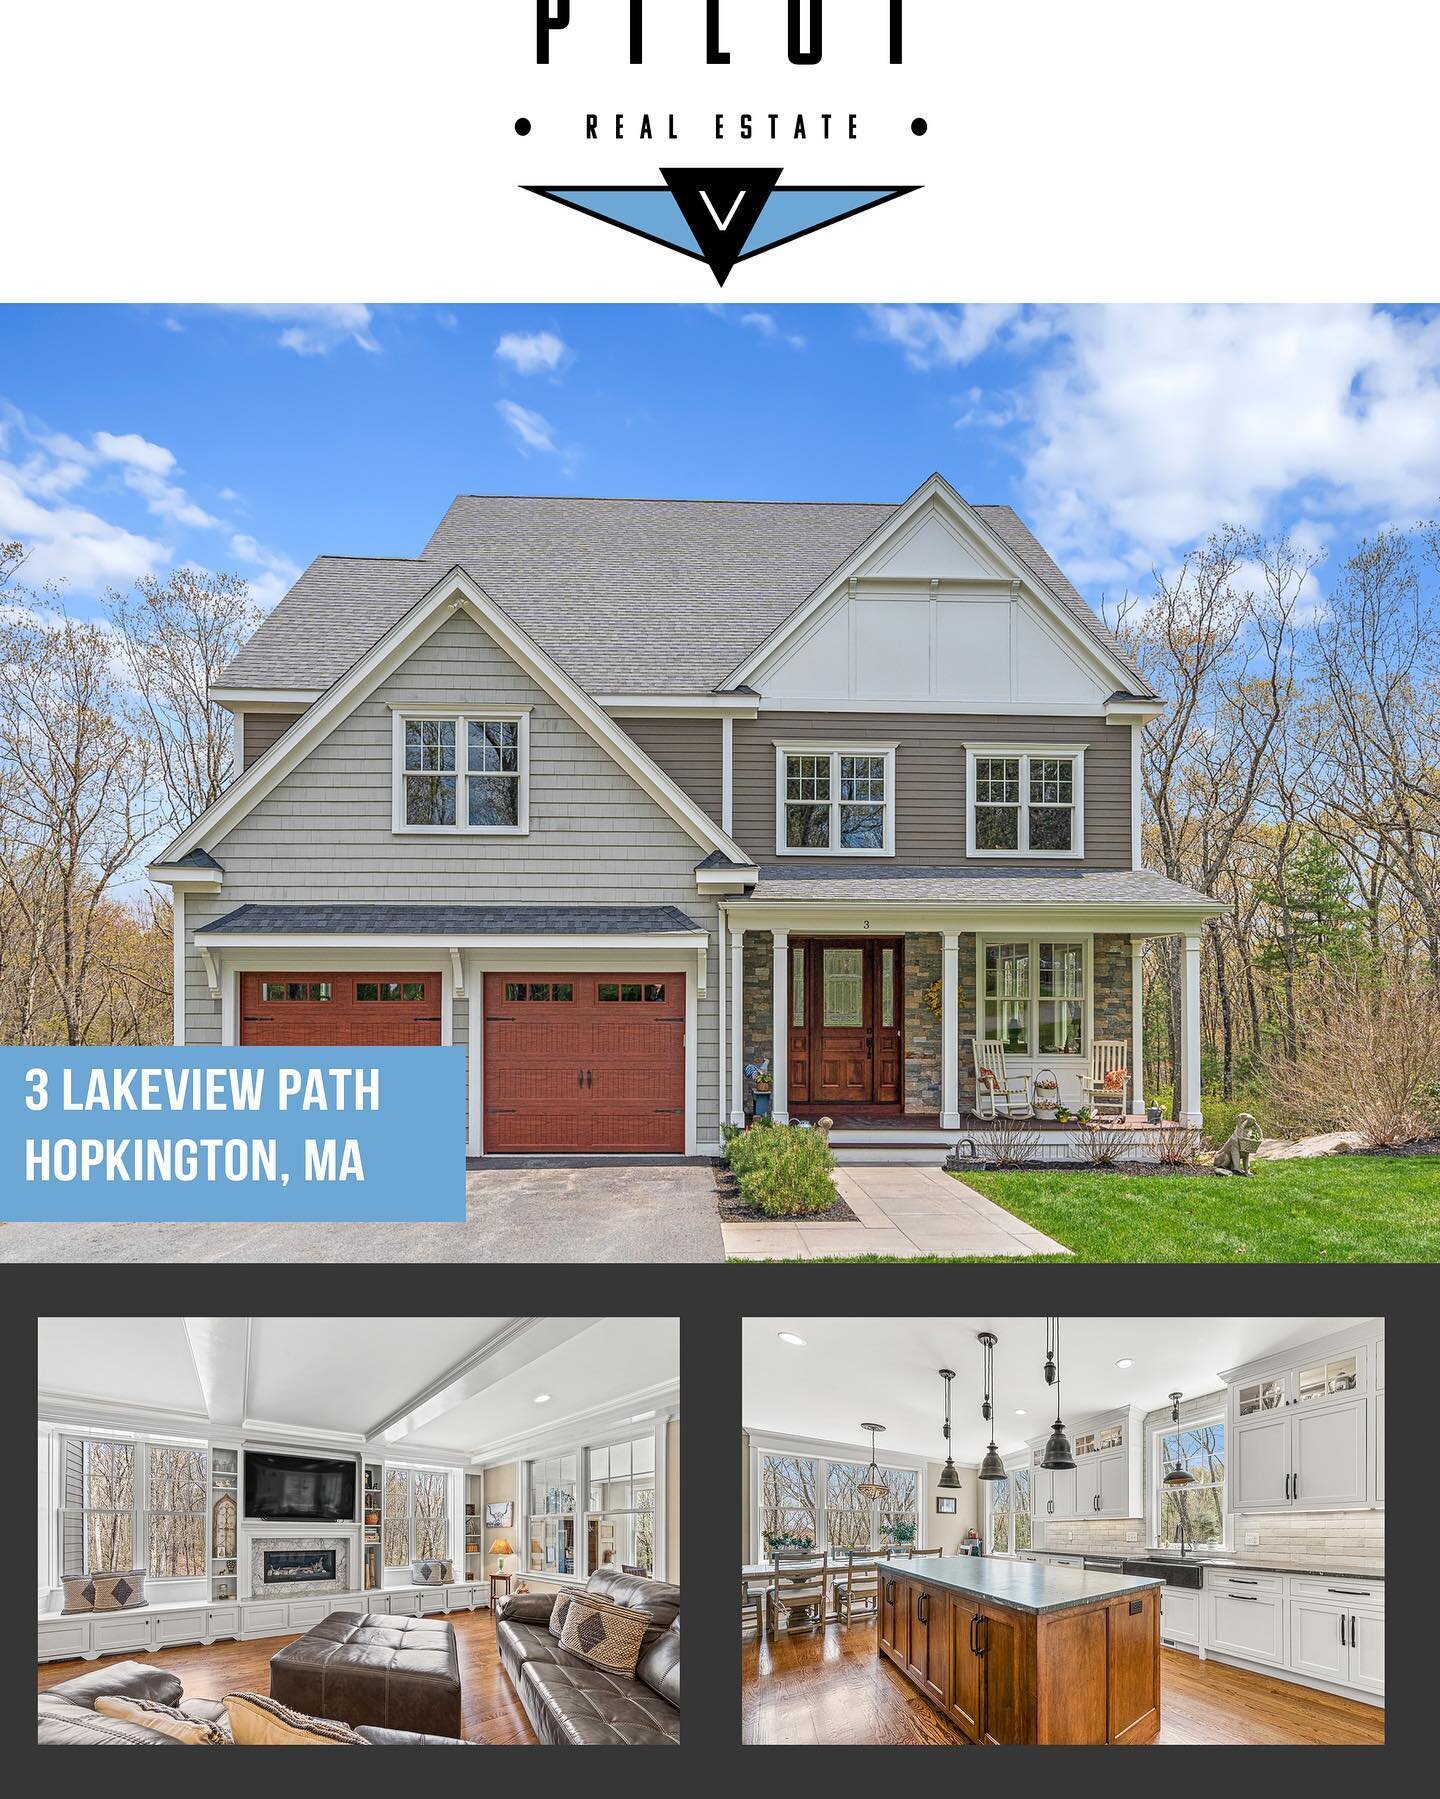 JUST LISTED: 3 Lakeview Path,
Hopkinton! //

 4 beds,4.5 baths, 6,000+ sqft l, 4 car Car Garage, Finished walkout basement, finished attic, 2 Acres of Land with the highest elevation in Hopkinton! 

Open house Saturday 11-12:30

#realestate #real #bo